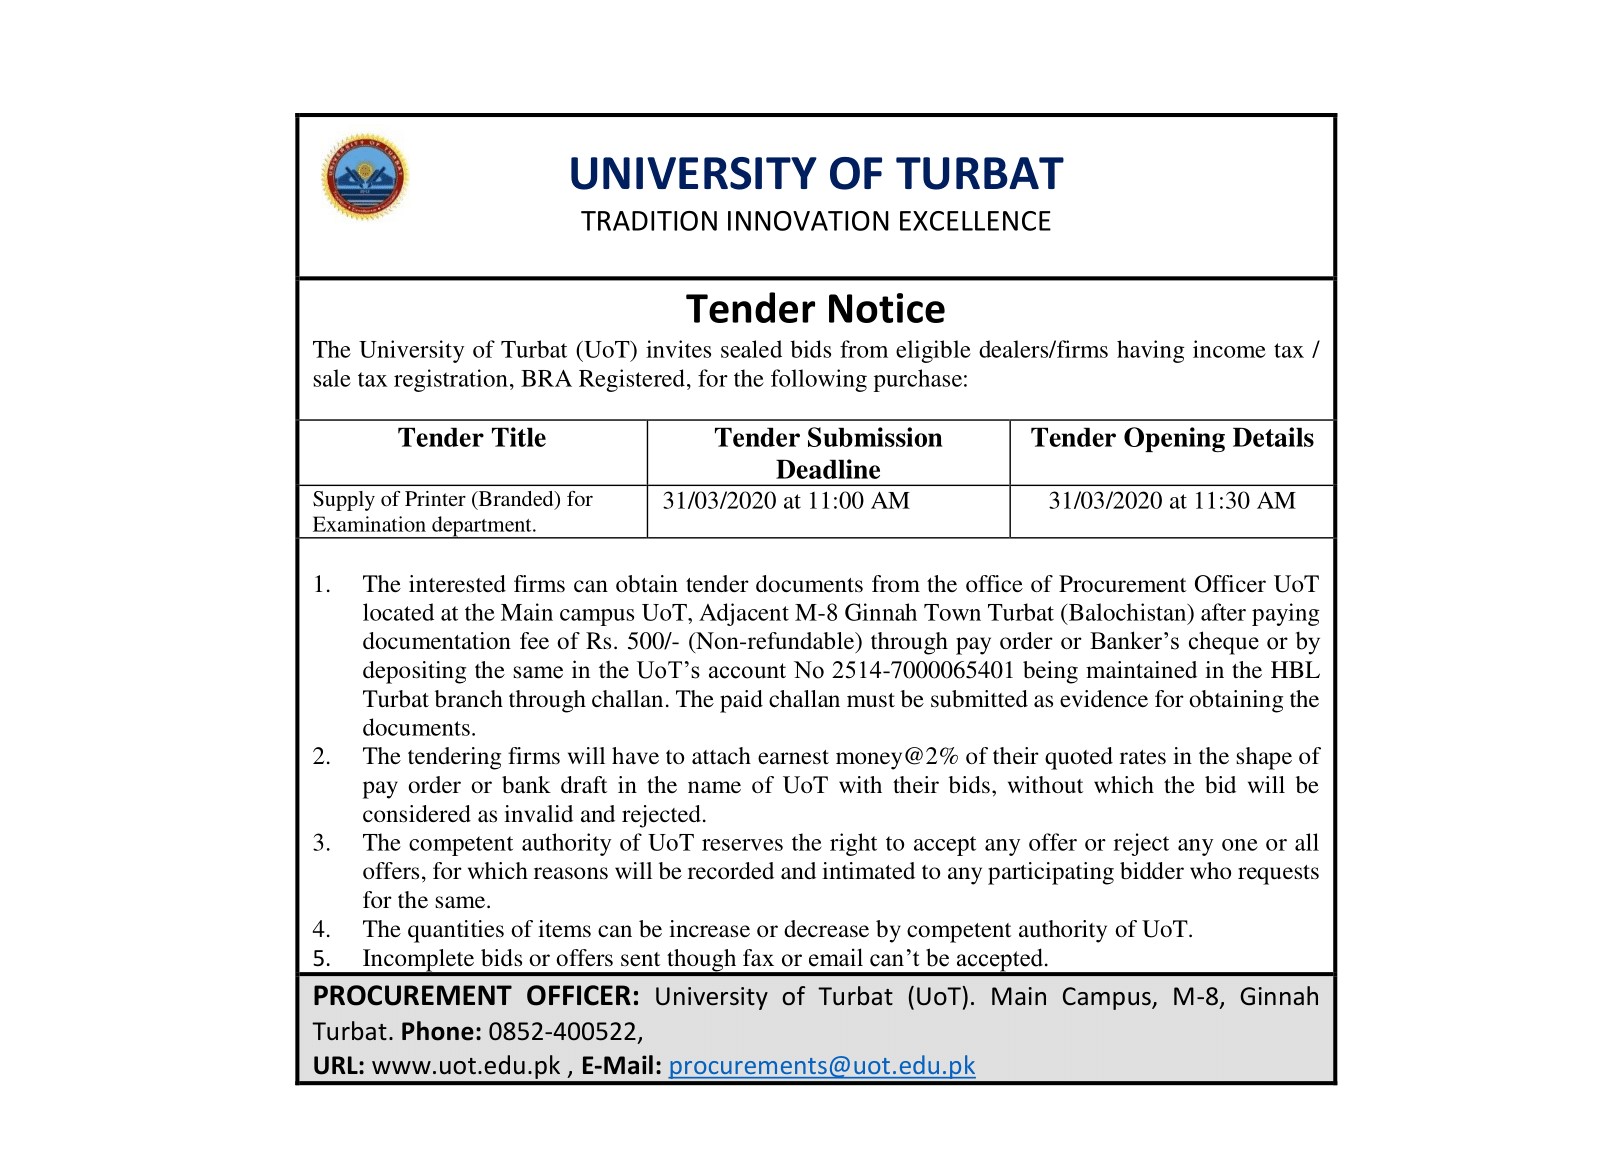 Tender Notice (Supply of Printer for Examination Department) 